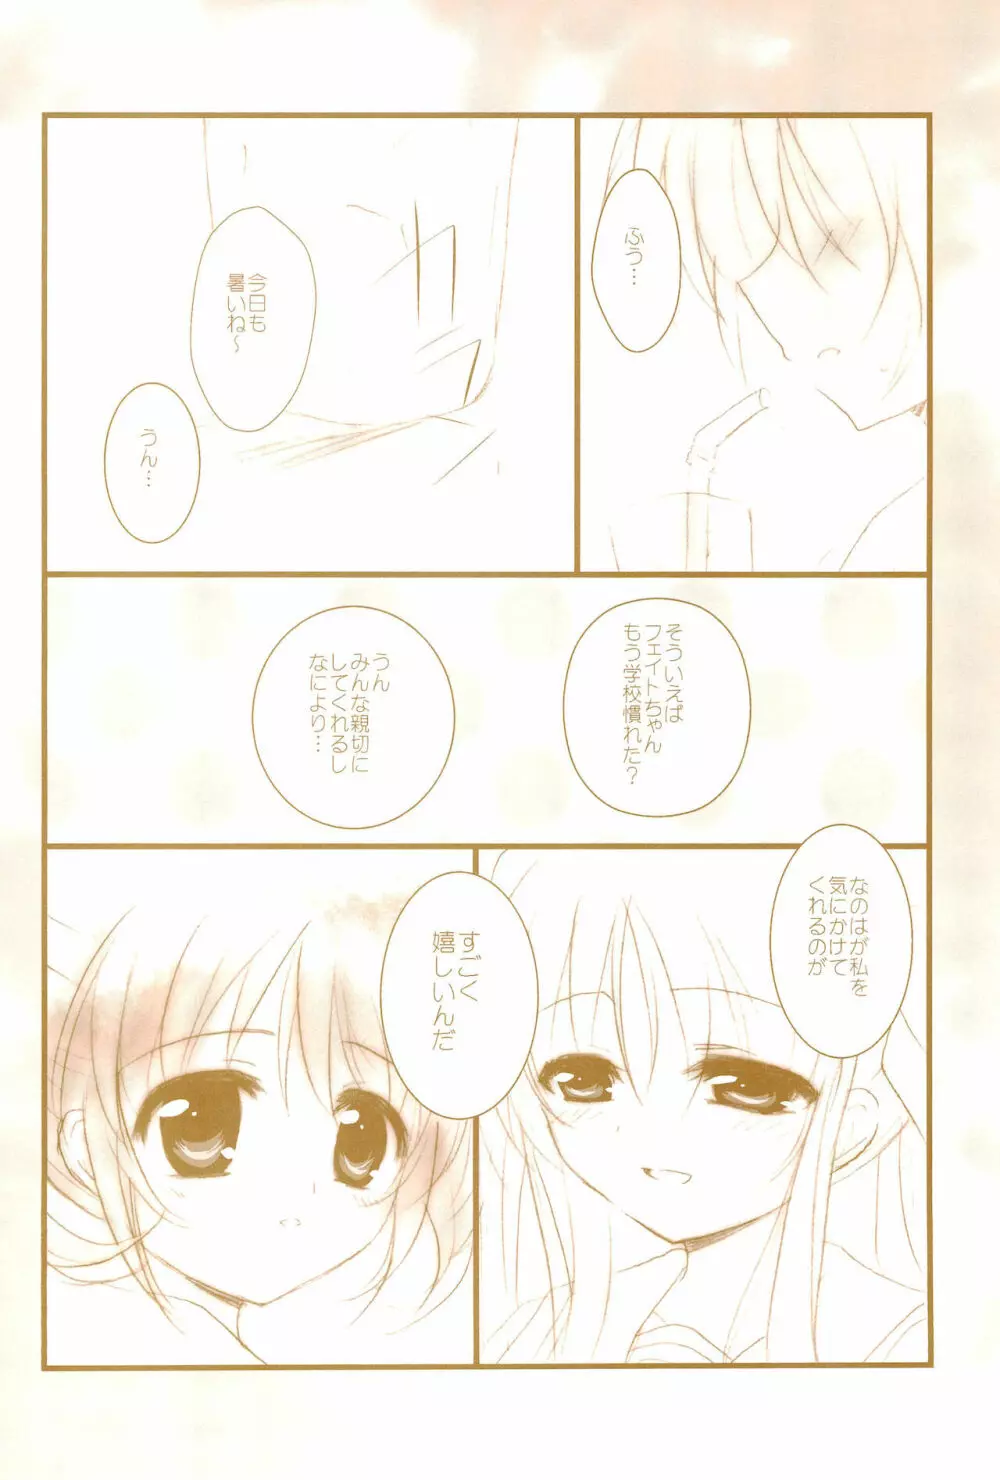 Love Life ～なのフェイなの再録集 3～ - page78